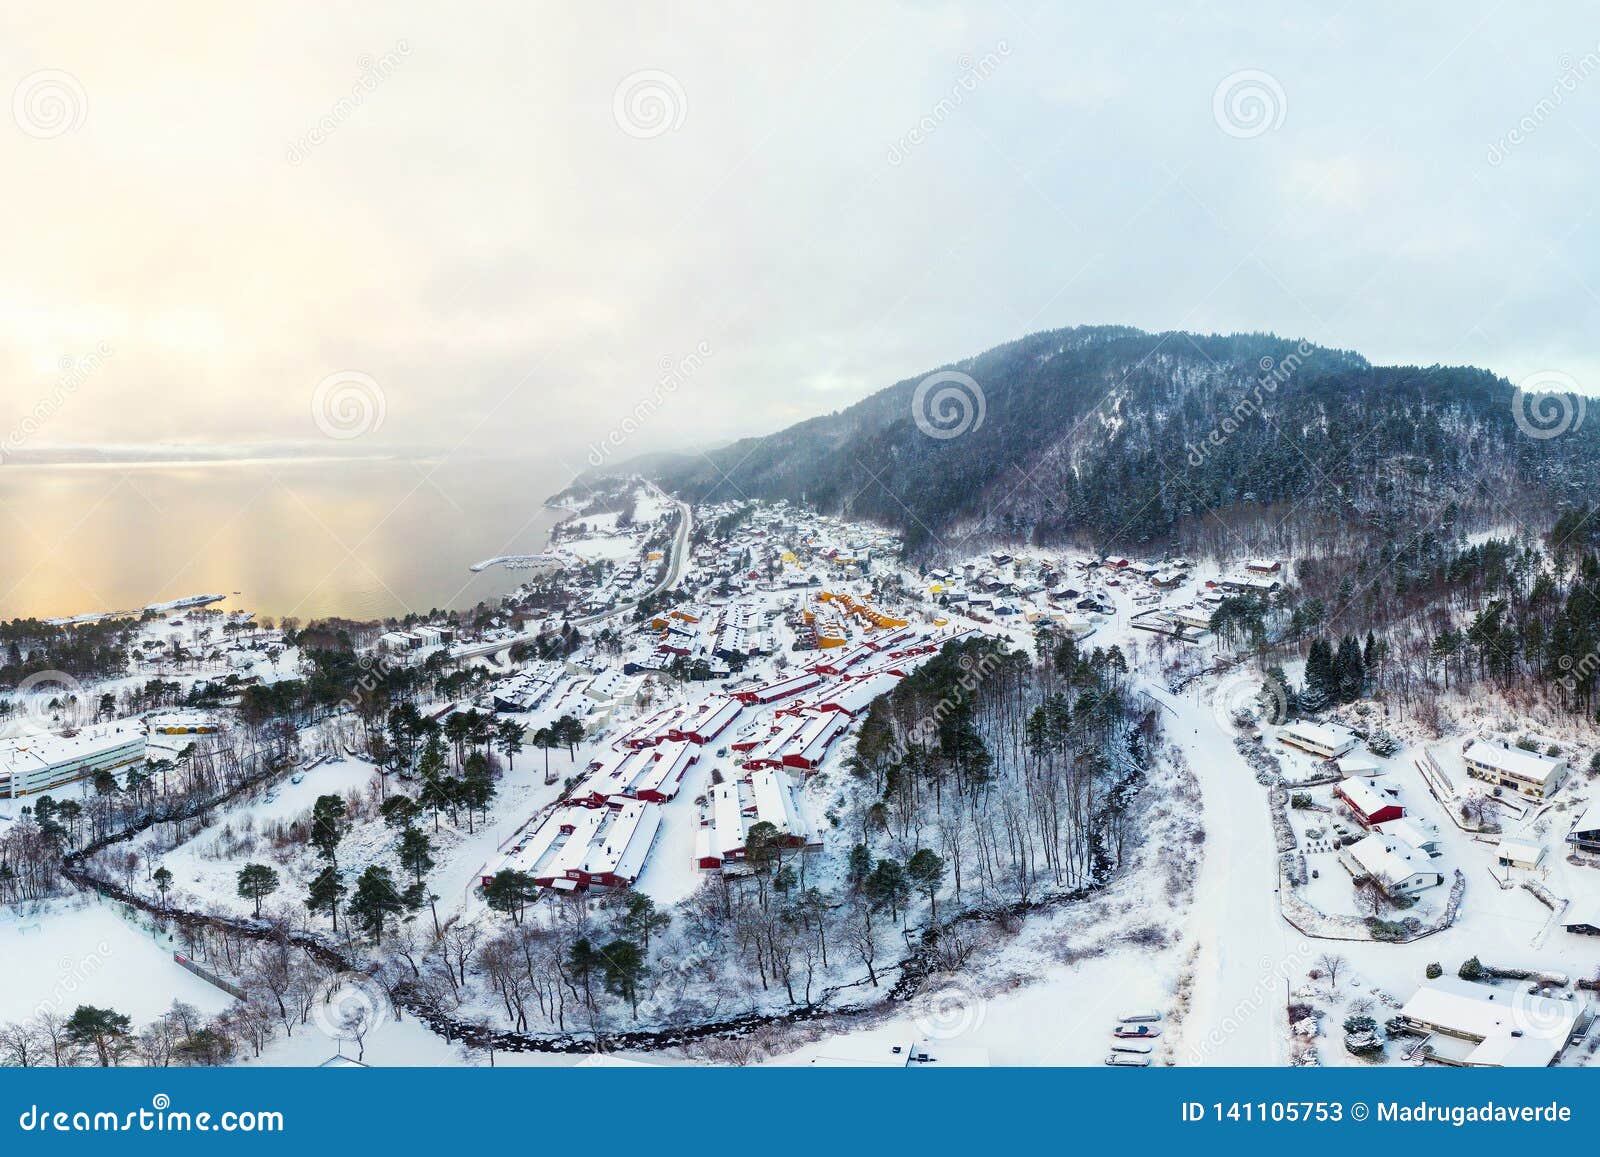 aerial view of residential area in molde, norway during a cloudy day in winter